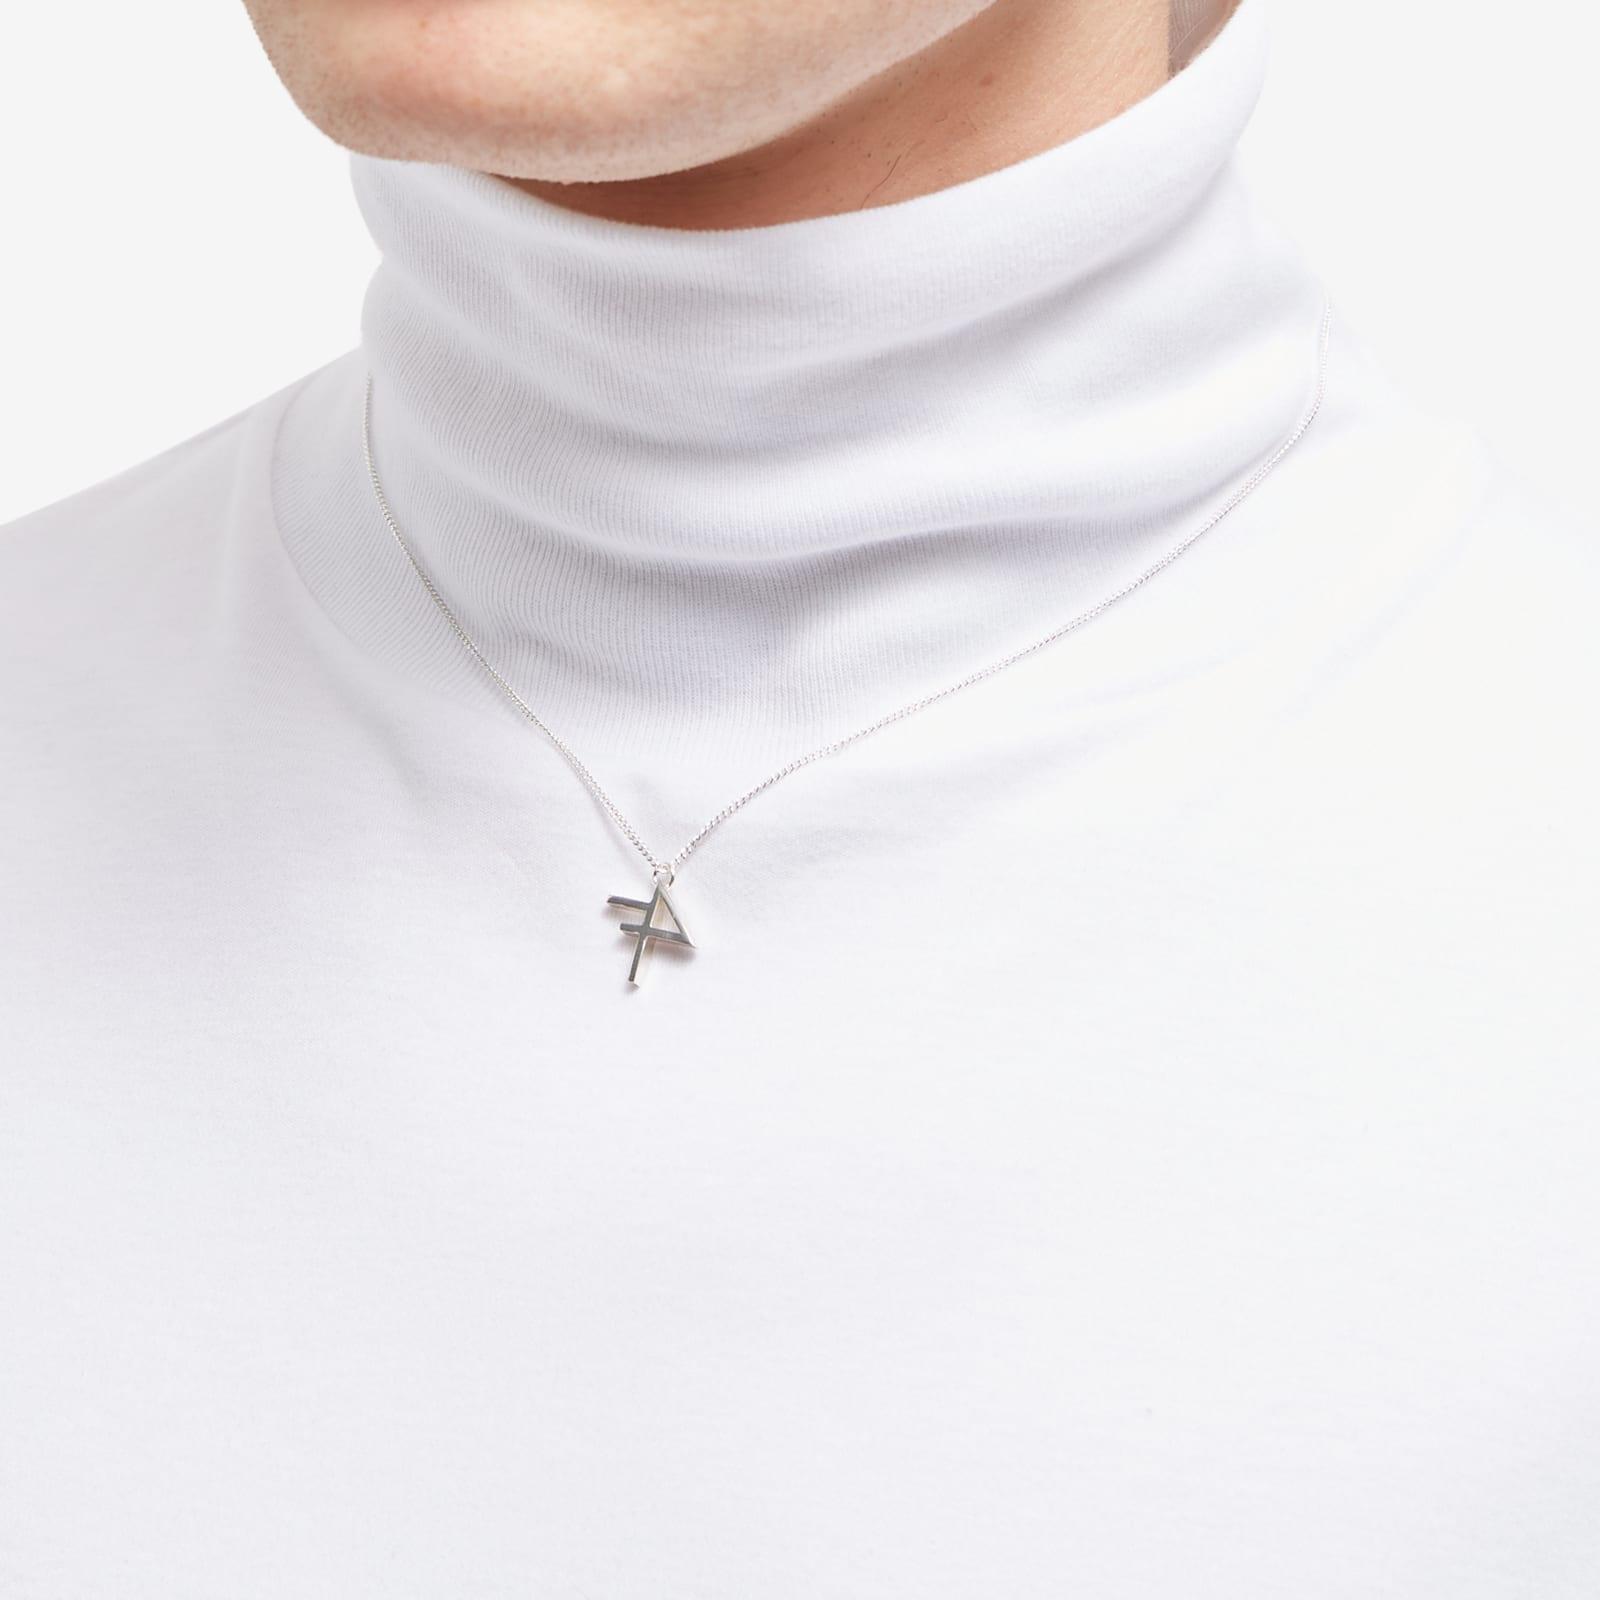 Fred Perry Raf Simons Pendant Necklace in Metallic for Men | Lyst